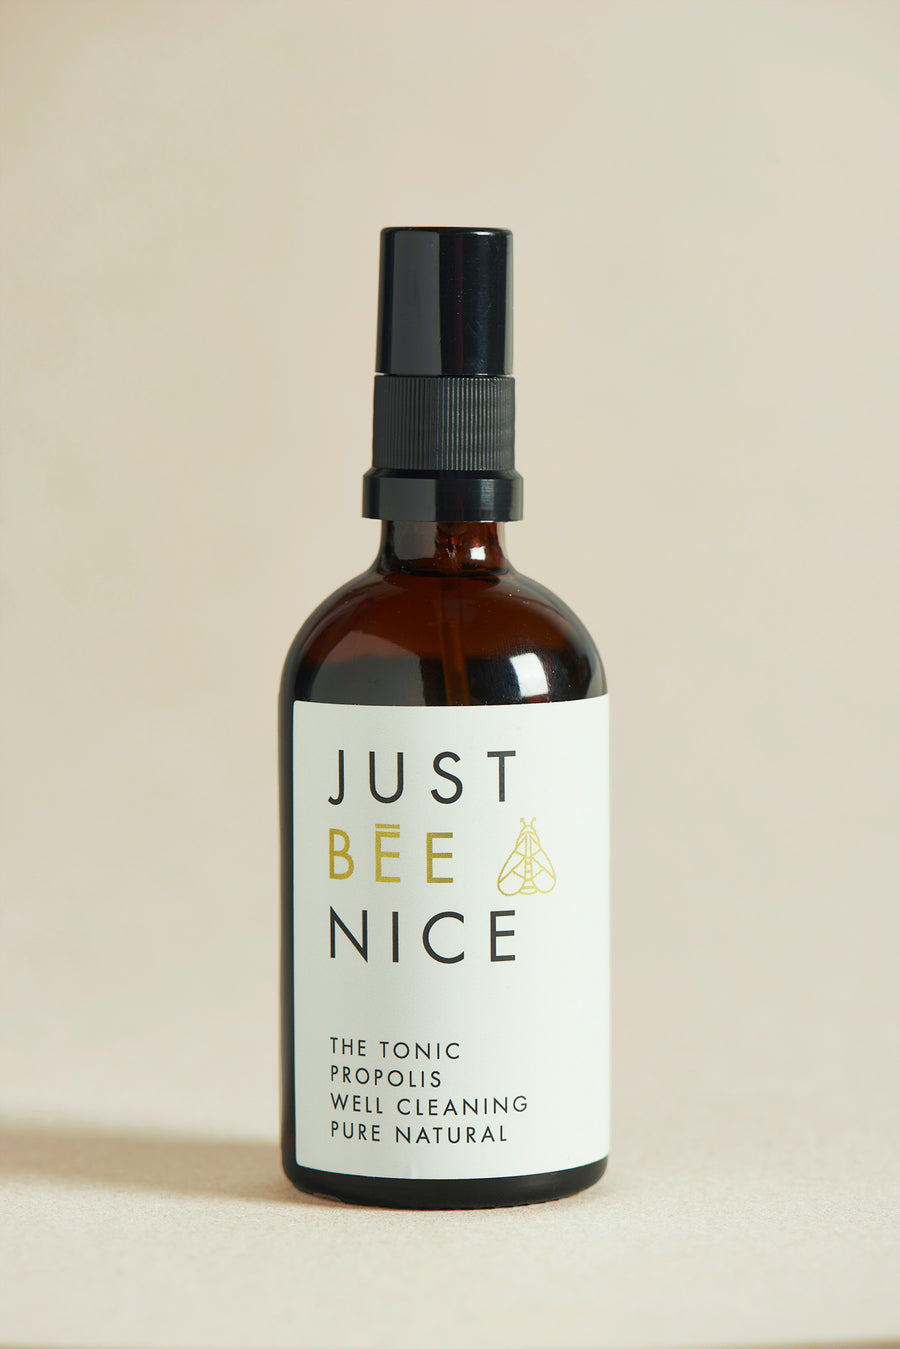 THE TONIC 100 ml in der Glasflasche